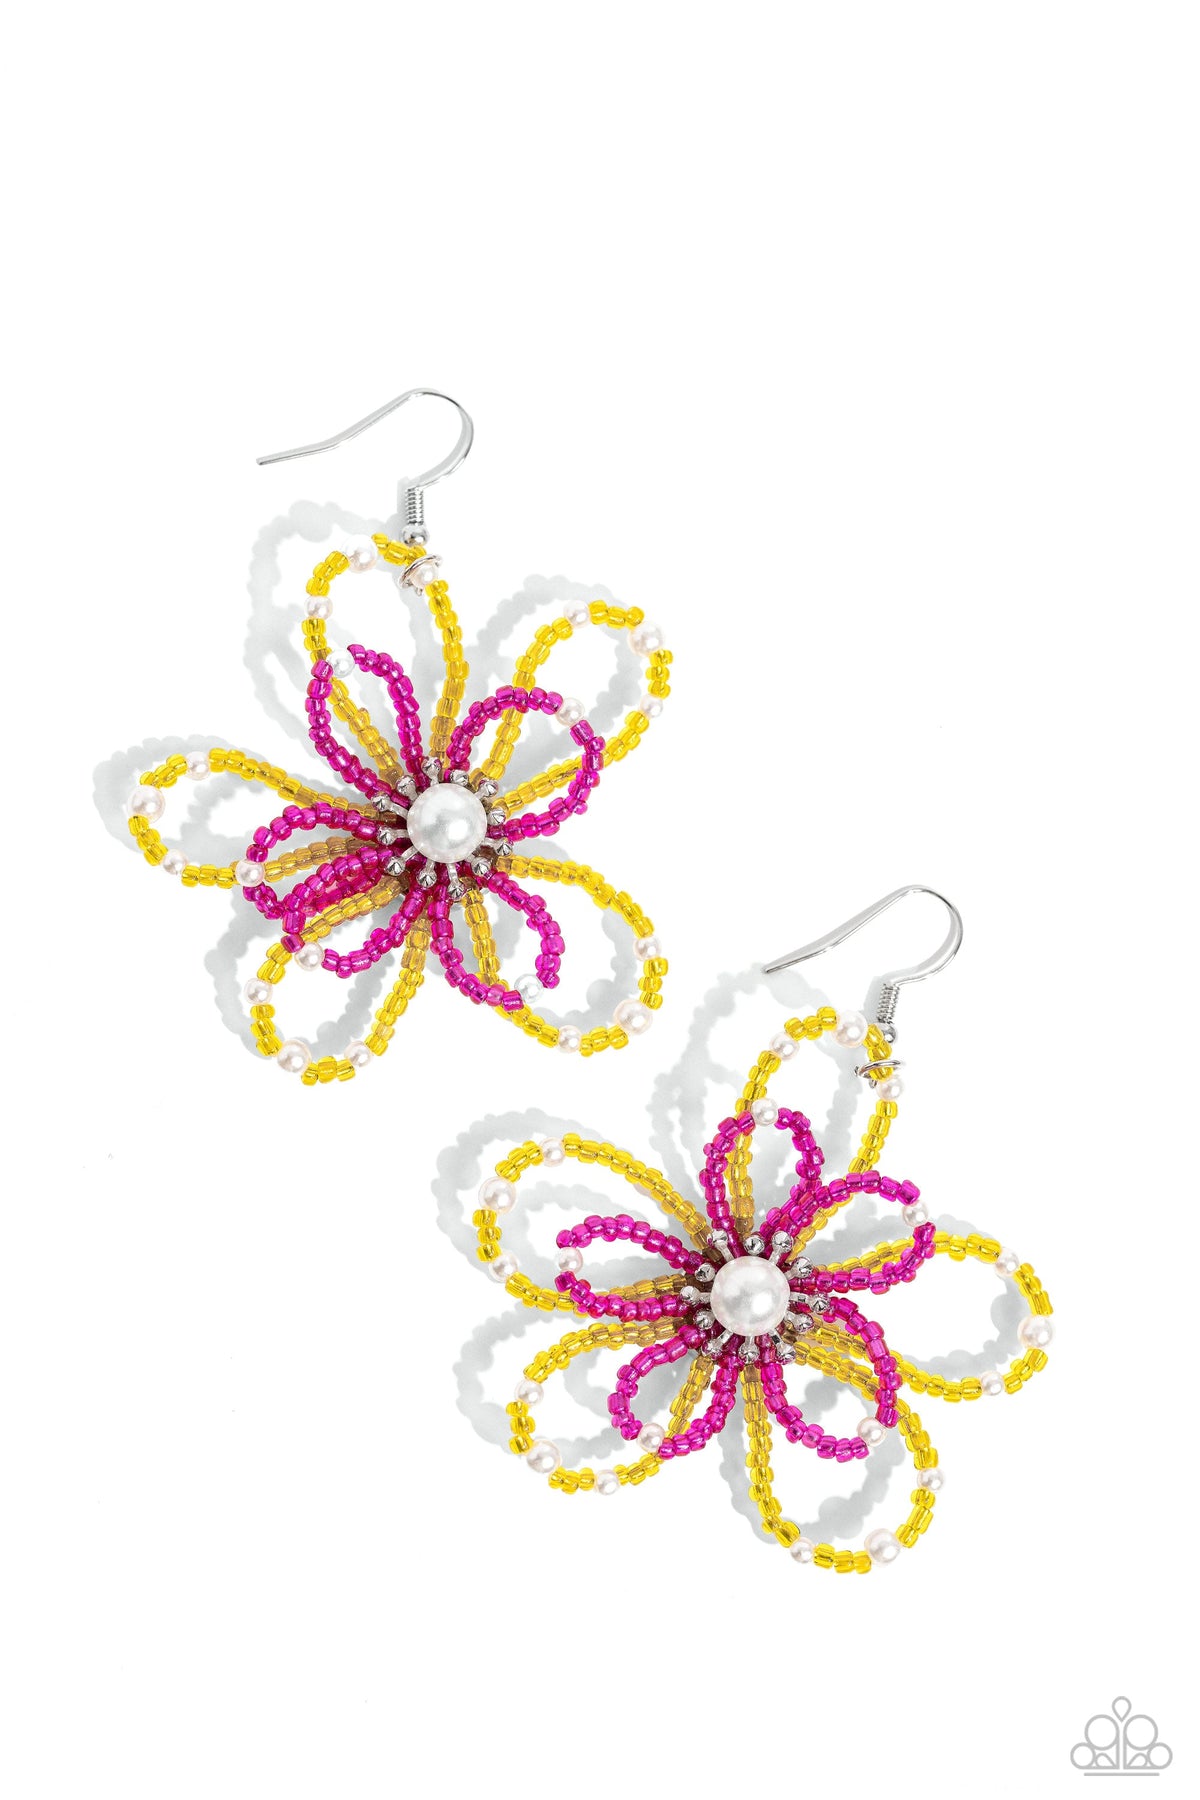 PEARL Crush Yellow &amp; Pink Flower Earrings - Paparazzi Accessories- lightbox - CarasShop.com - $5 Jewelry by Cara Jewels